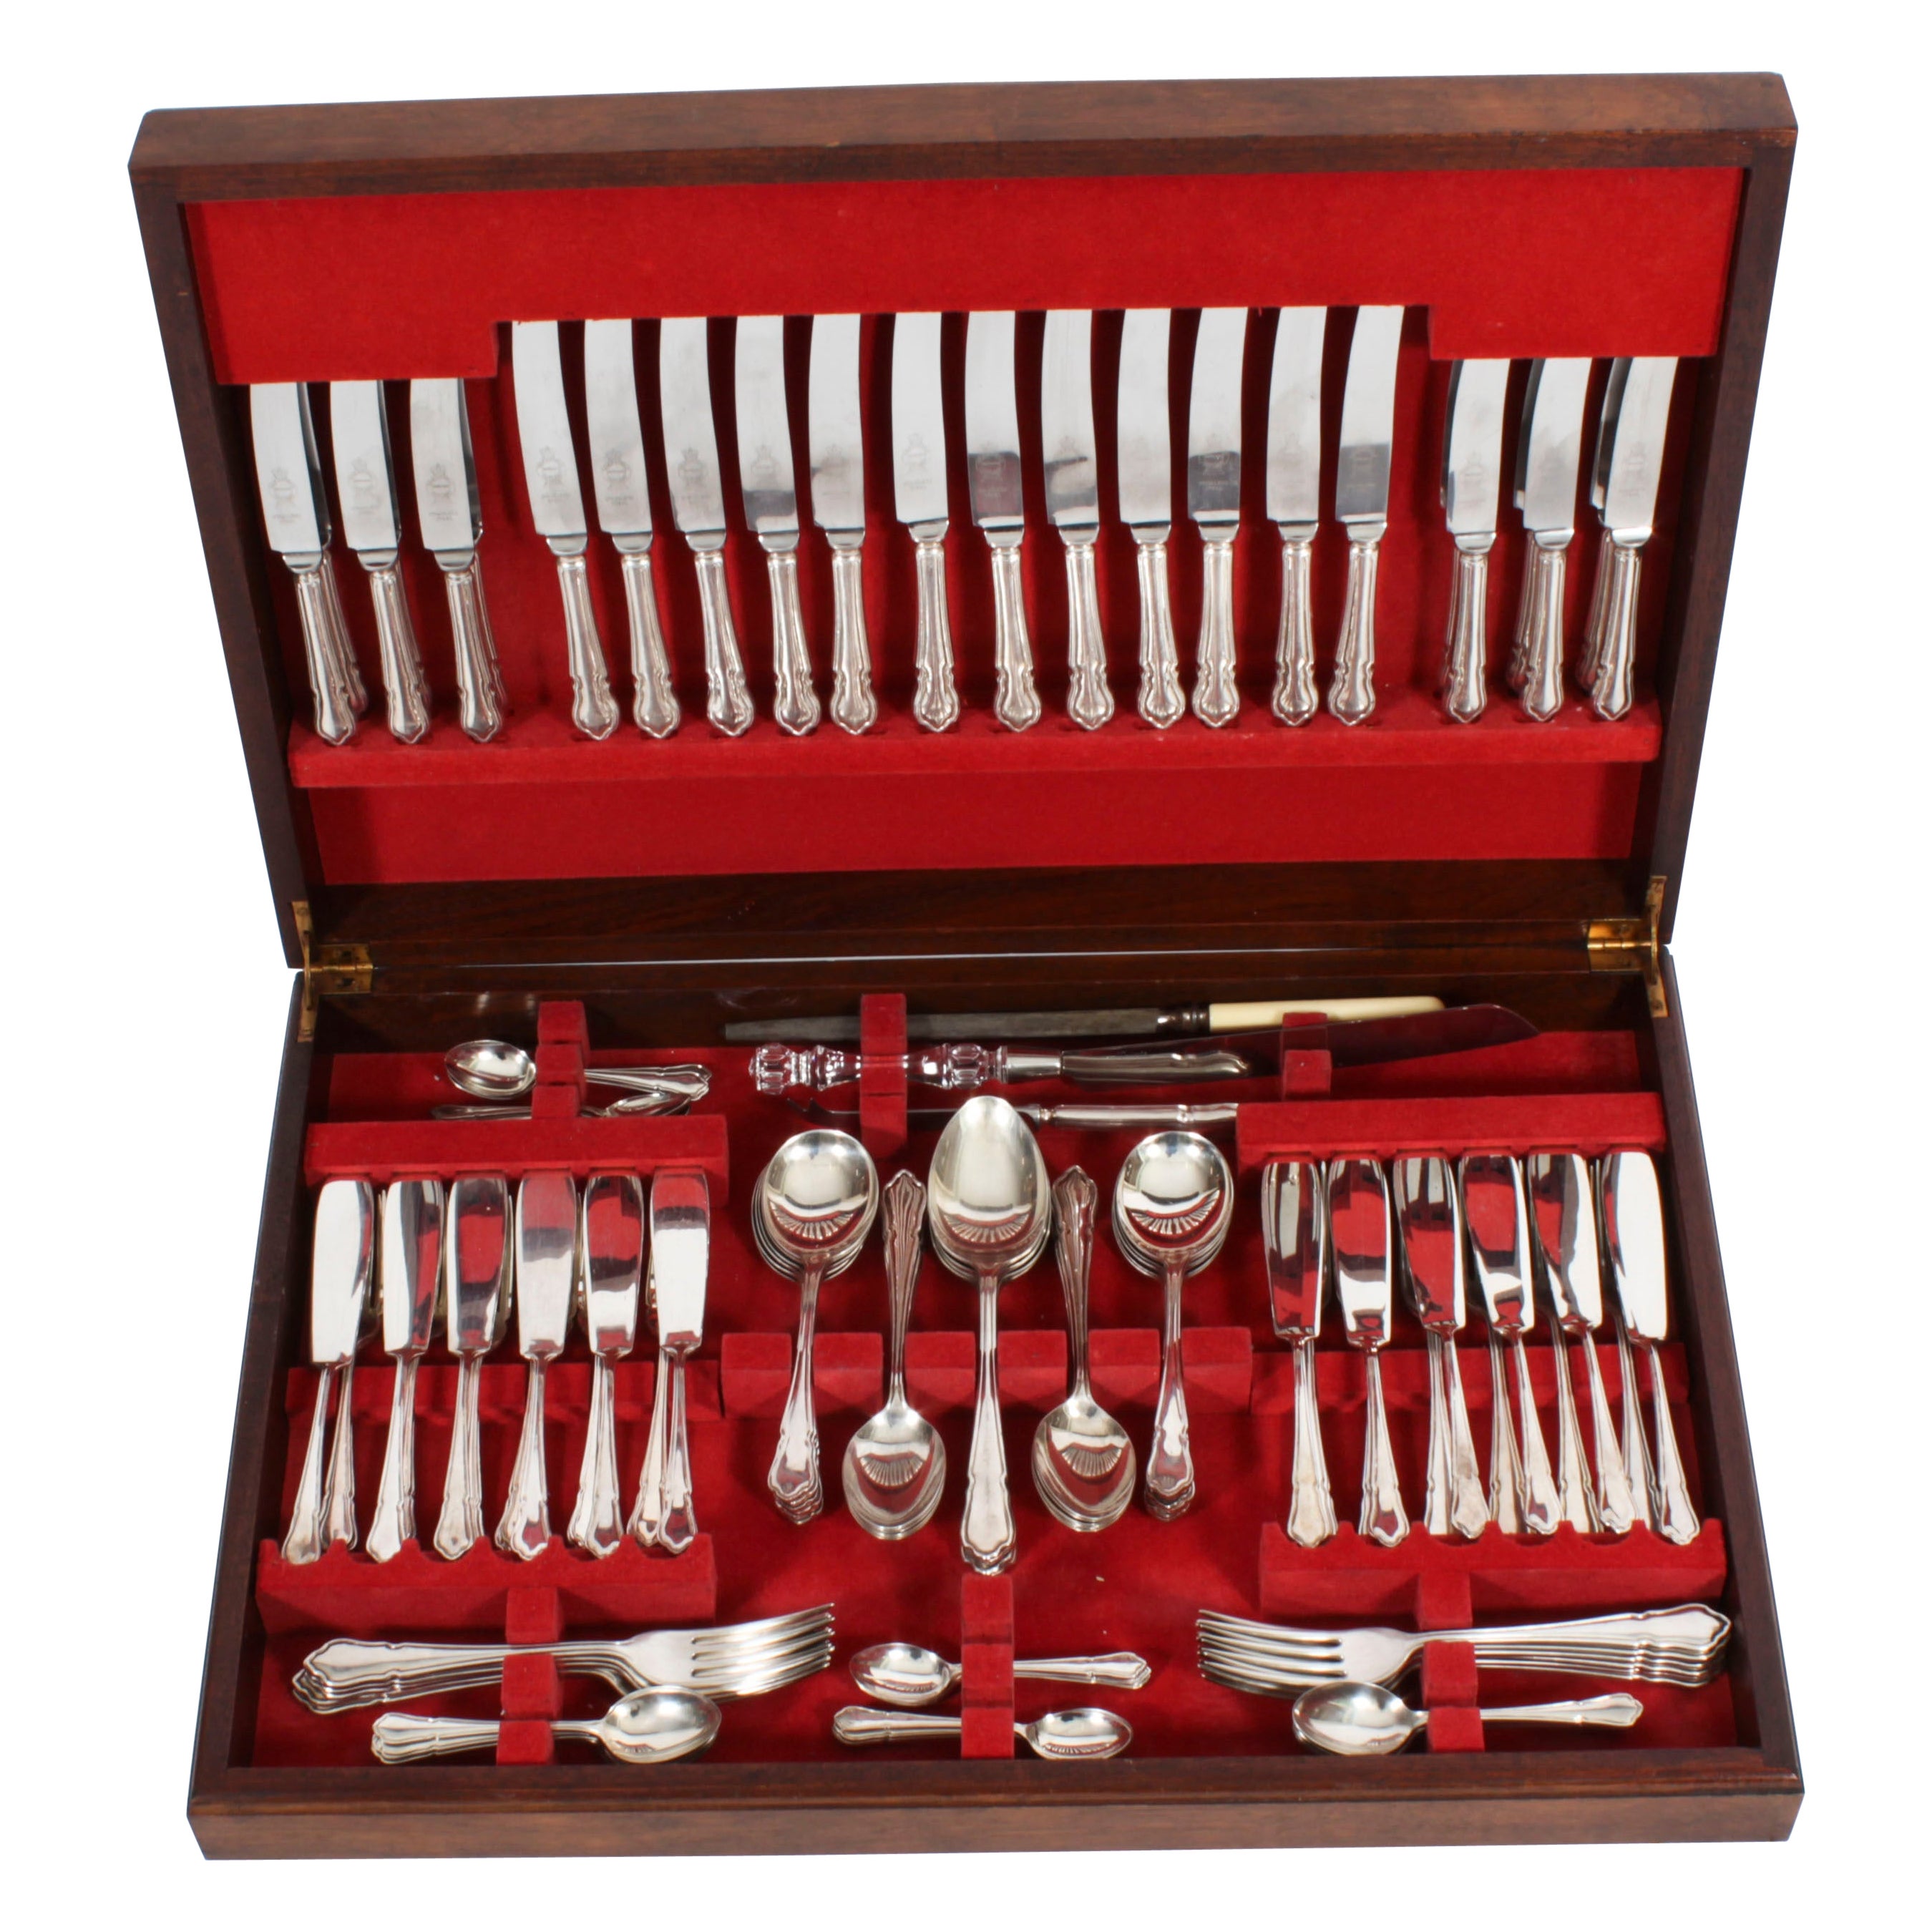 Vintage Canteen x 12 Silver Plated Cutlery Set Mid-20th Century